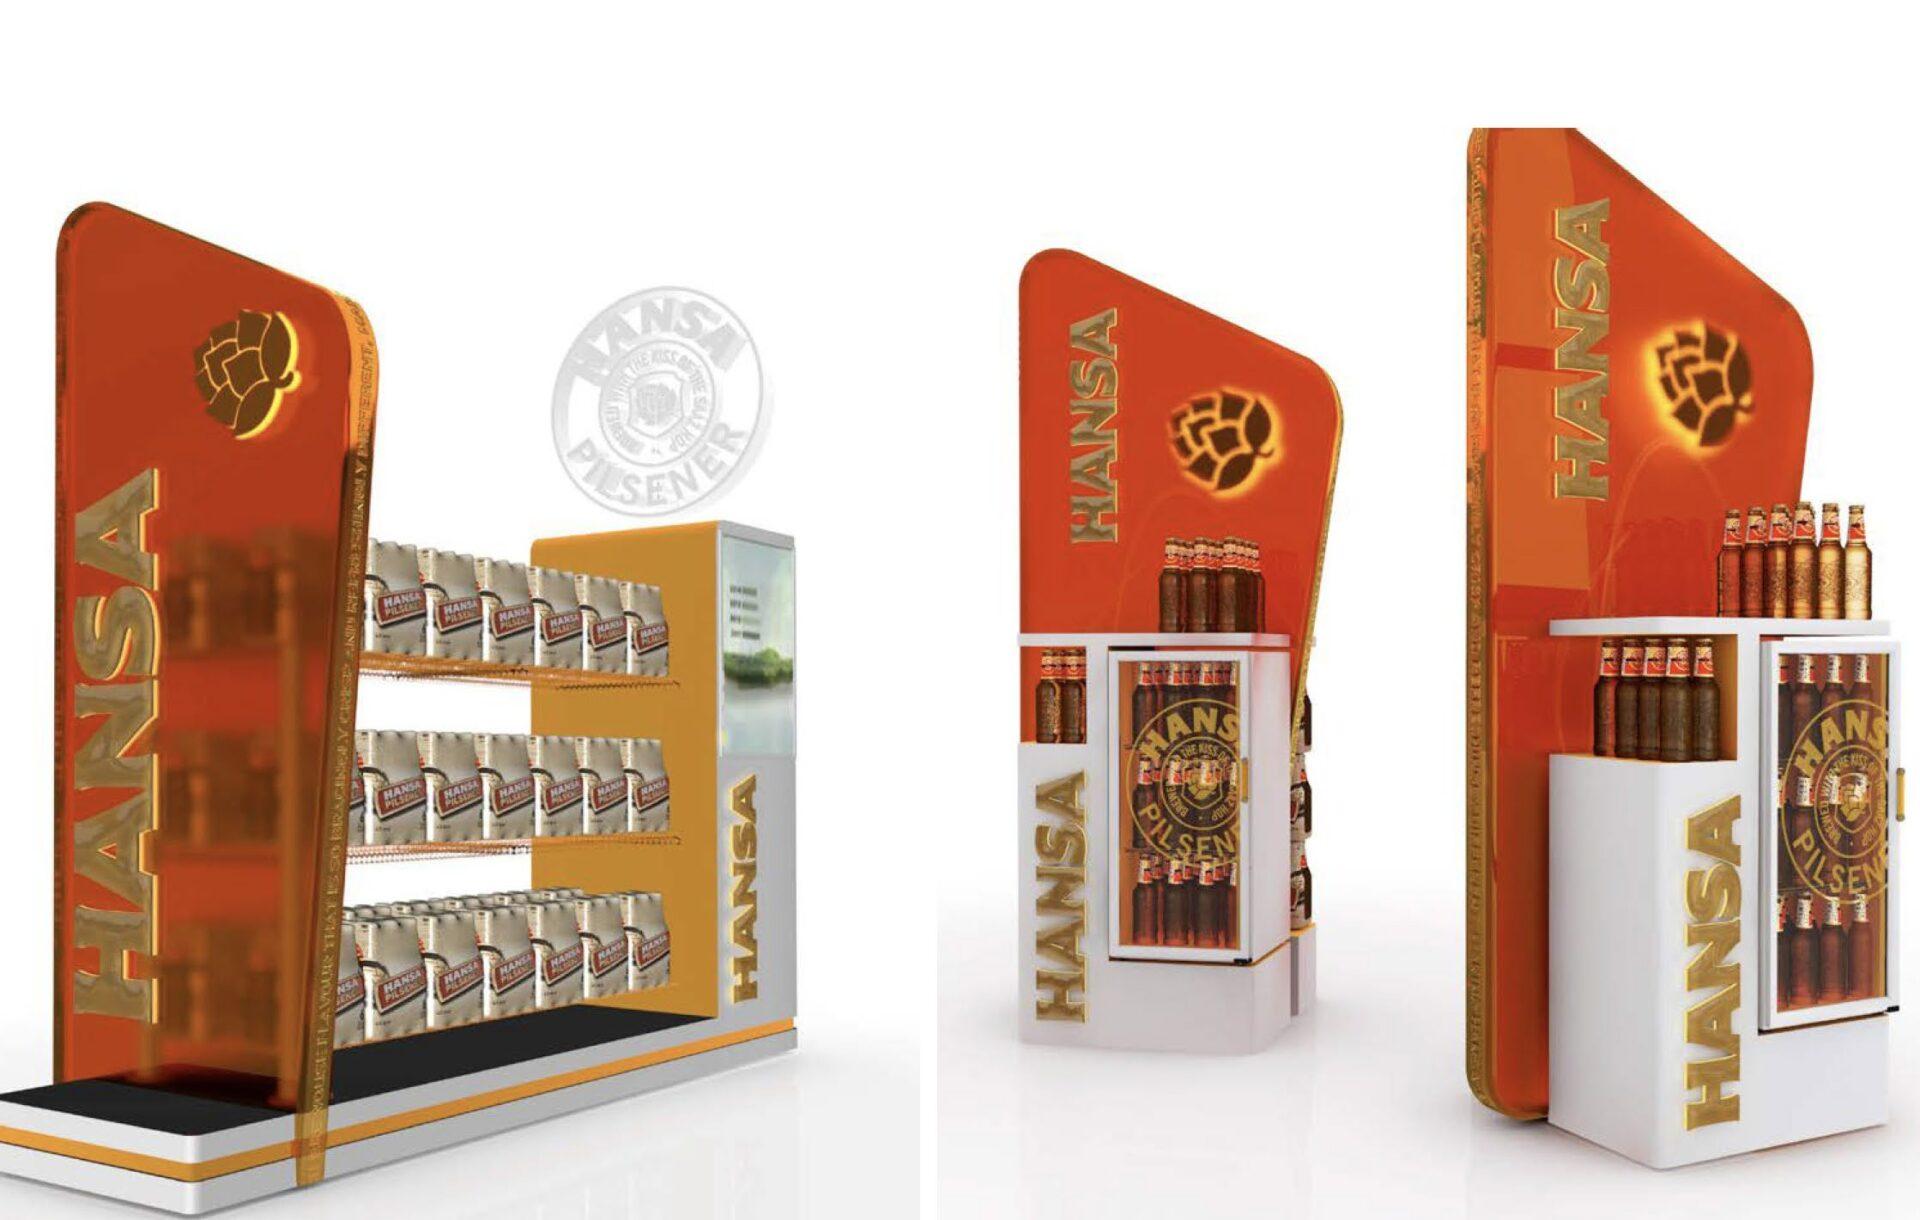 Hansa Beer Point of Sale Design Agency and Packaging Design Agency